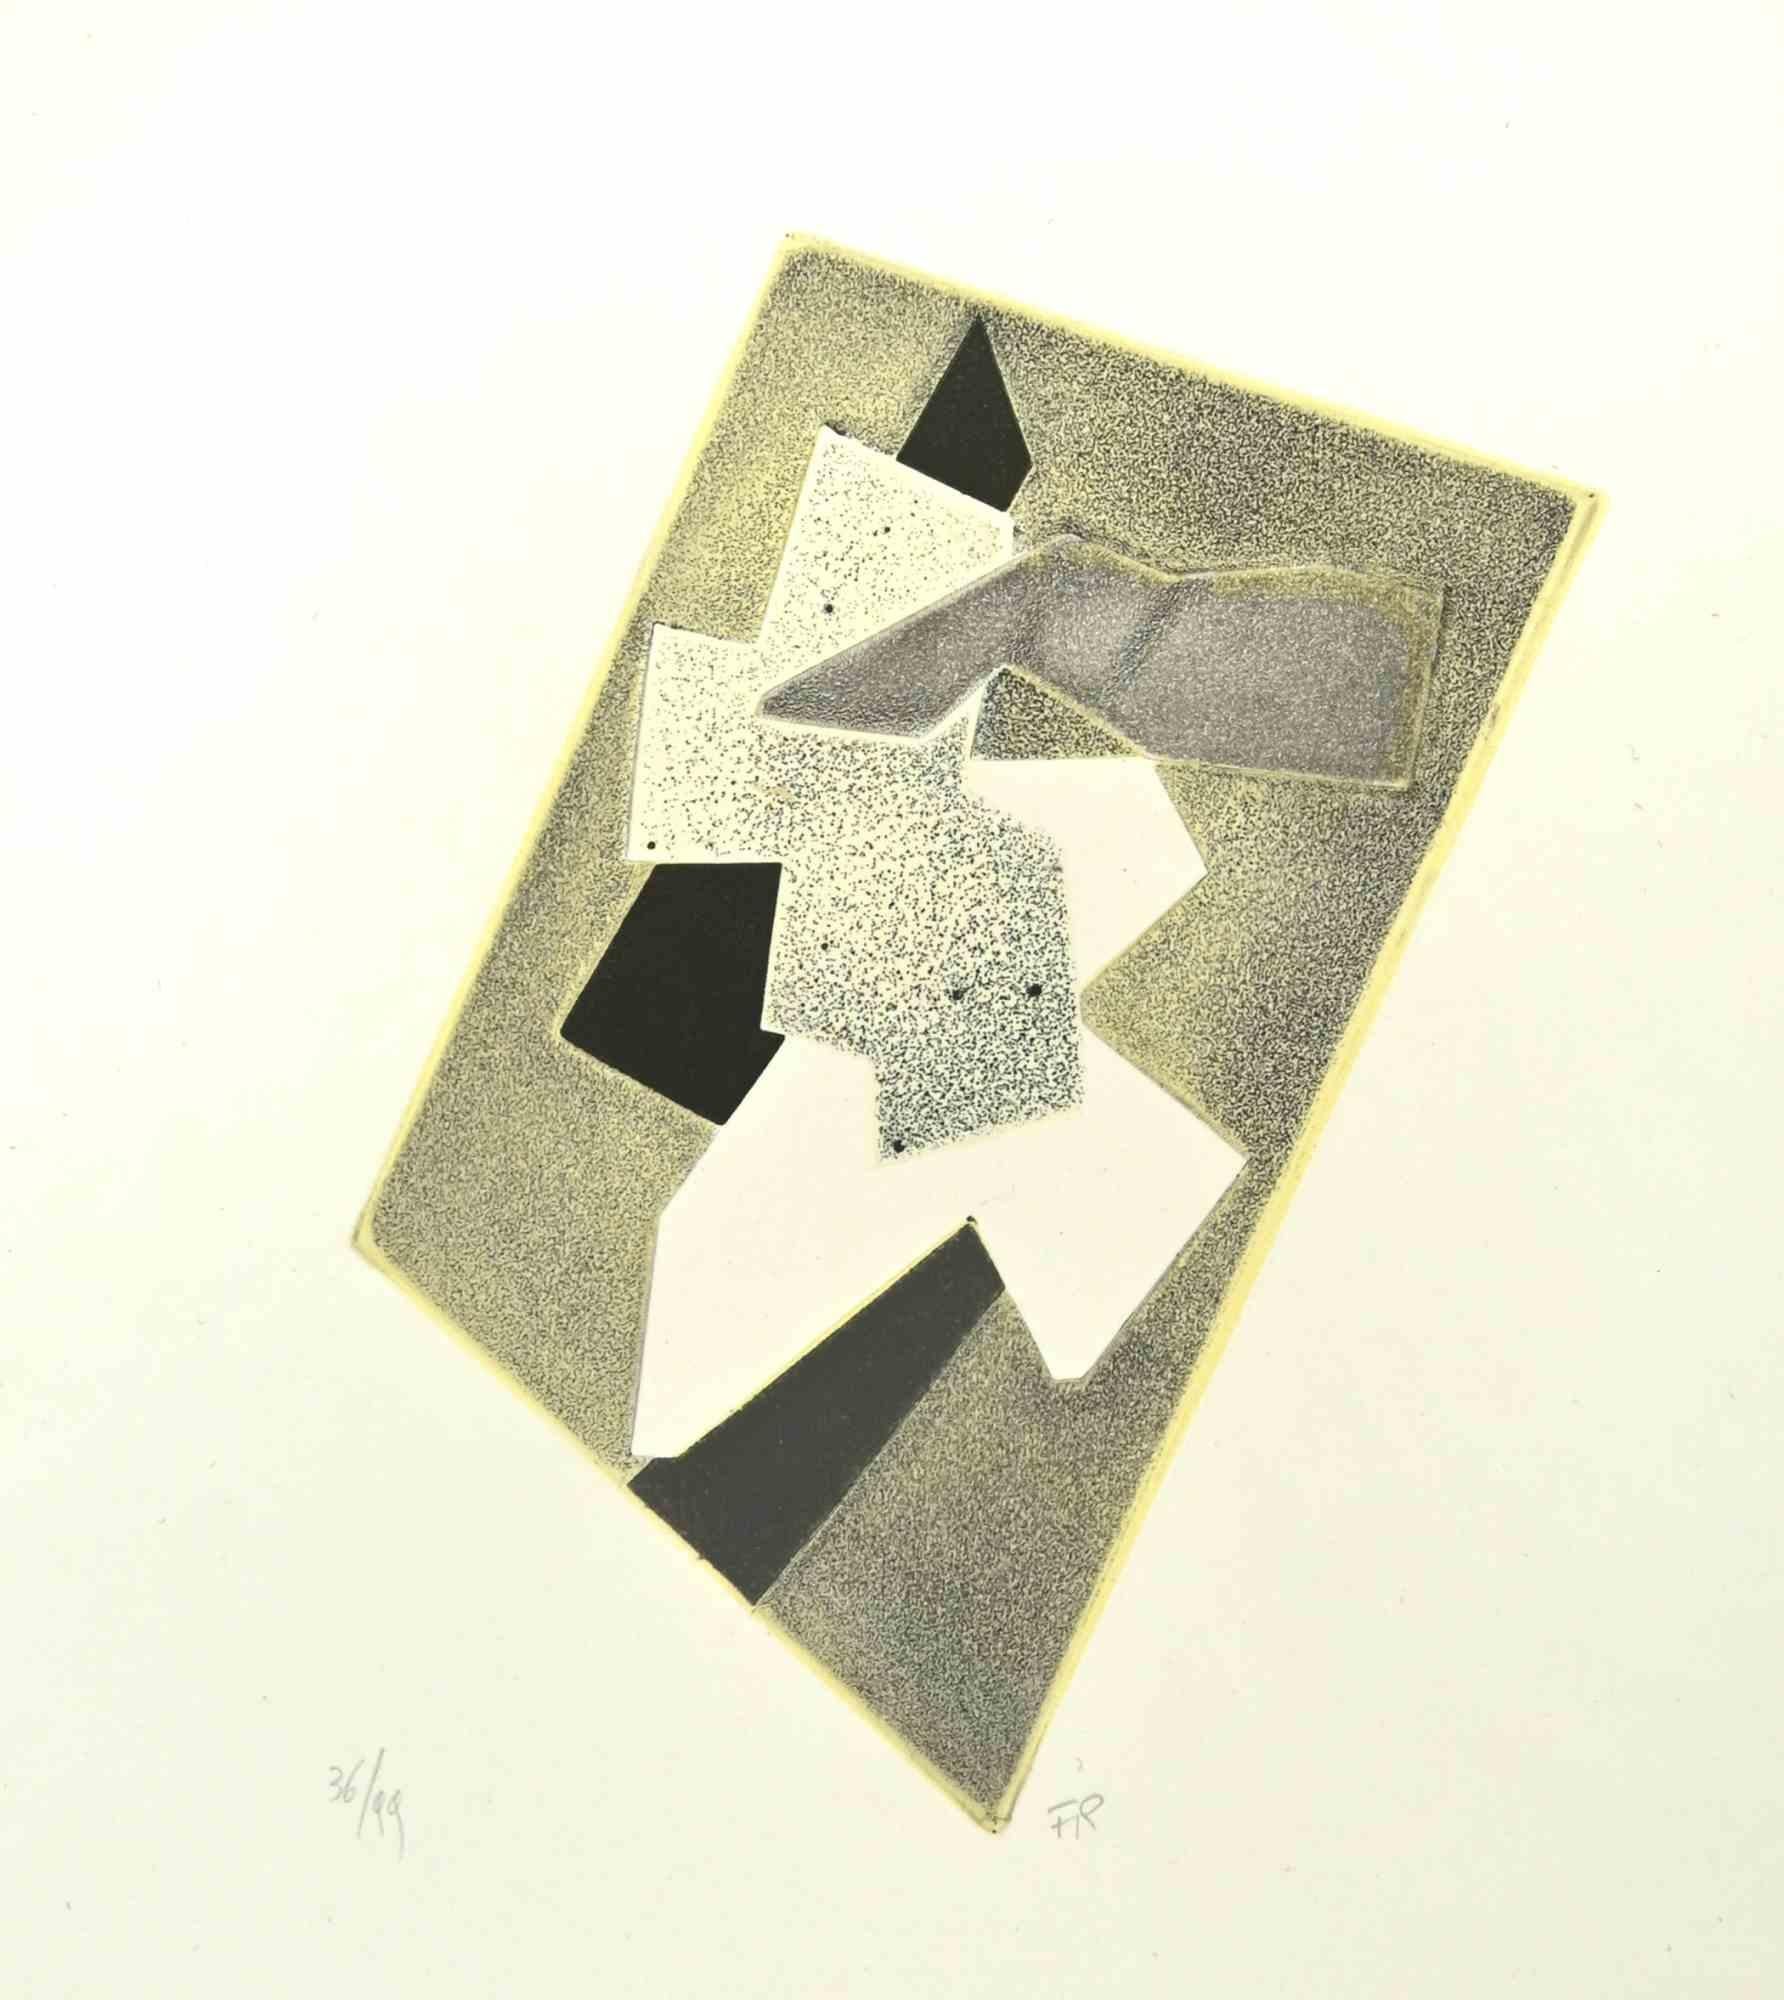 Abstract composition is a etching and embossing realized by Hans Richter.

Monogrammed in the lower part. 

50 x 35 cm. No frame.

 

Hans Richter (Berlin 1888.1976) was a German director, painter and writer.  Director, film theorist and one of the